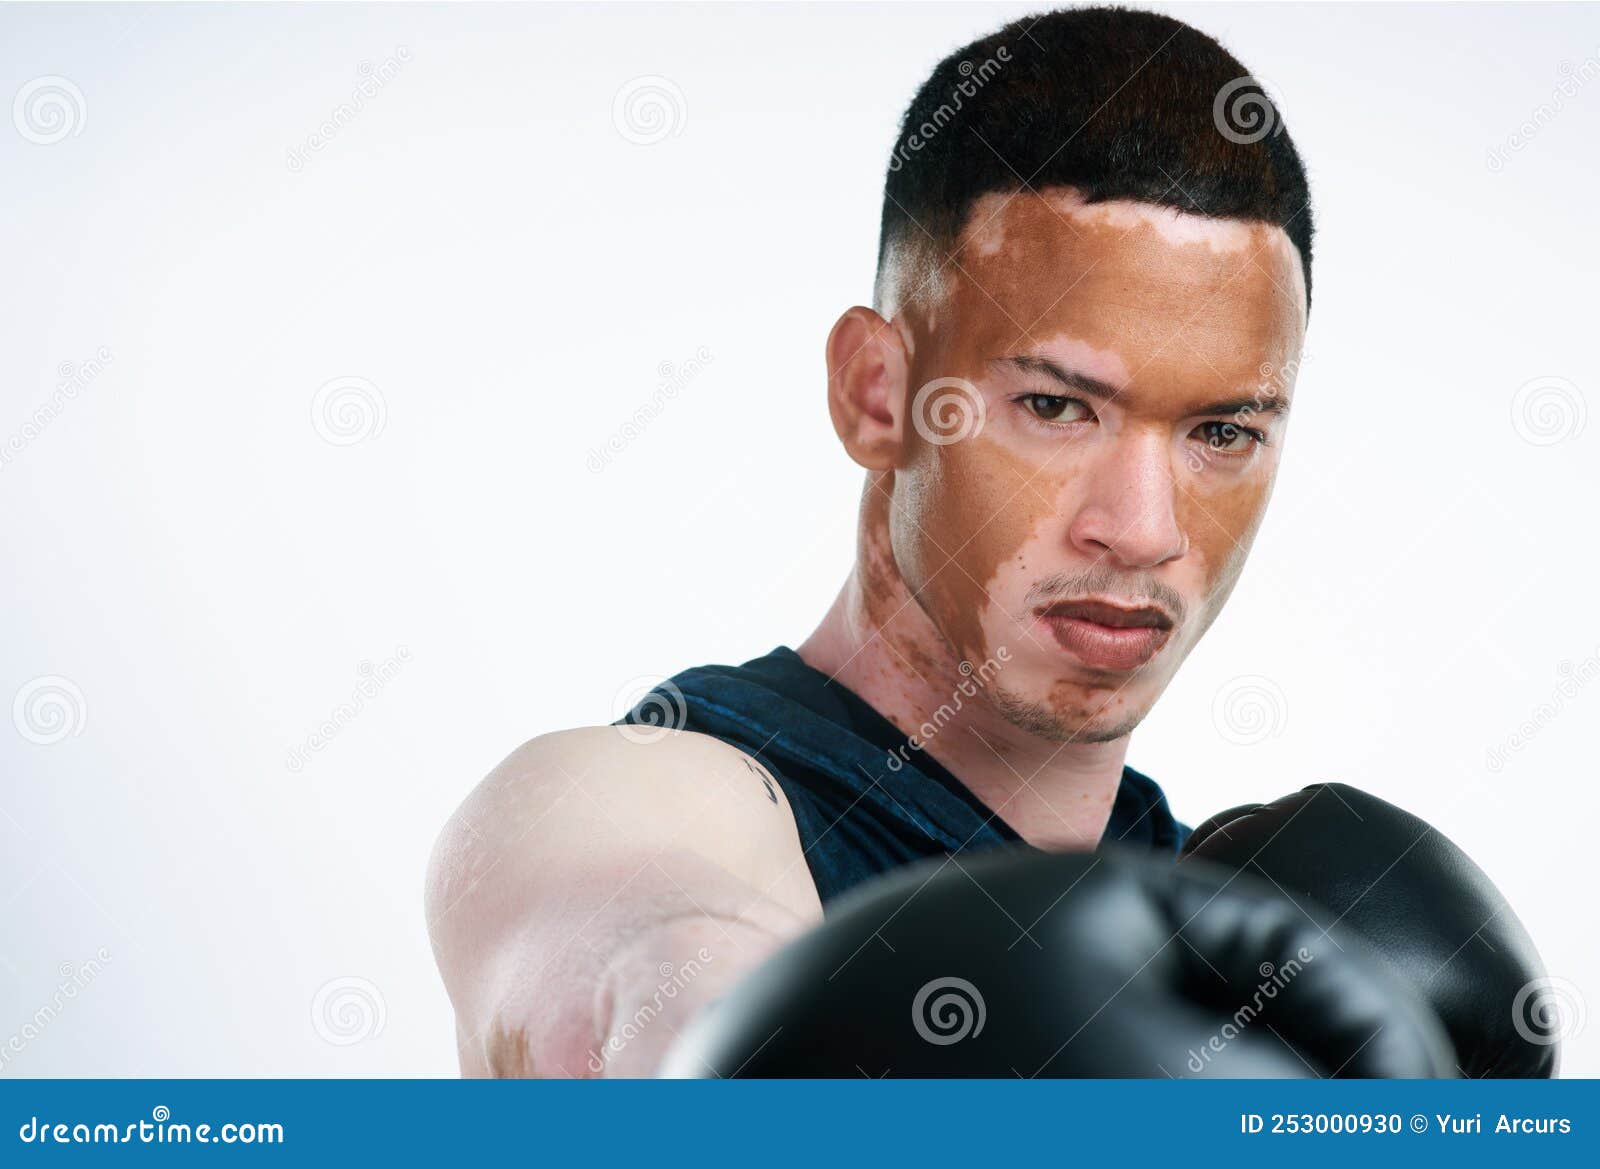 Boxing Round One Stock Illustrations – 69 Boxing Round One Stock  Illustrations, Vectors & Clipart - Dreamstime